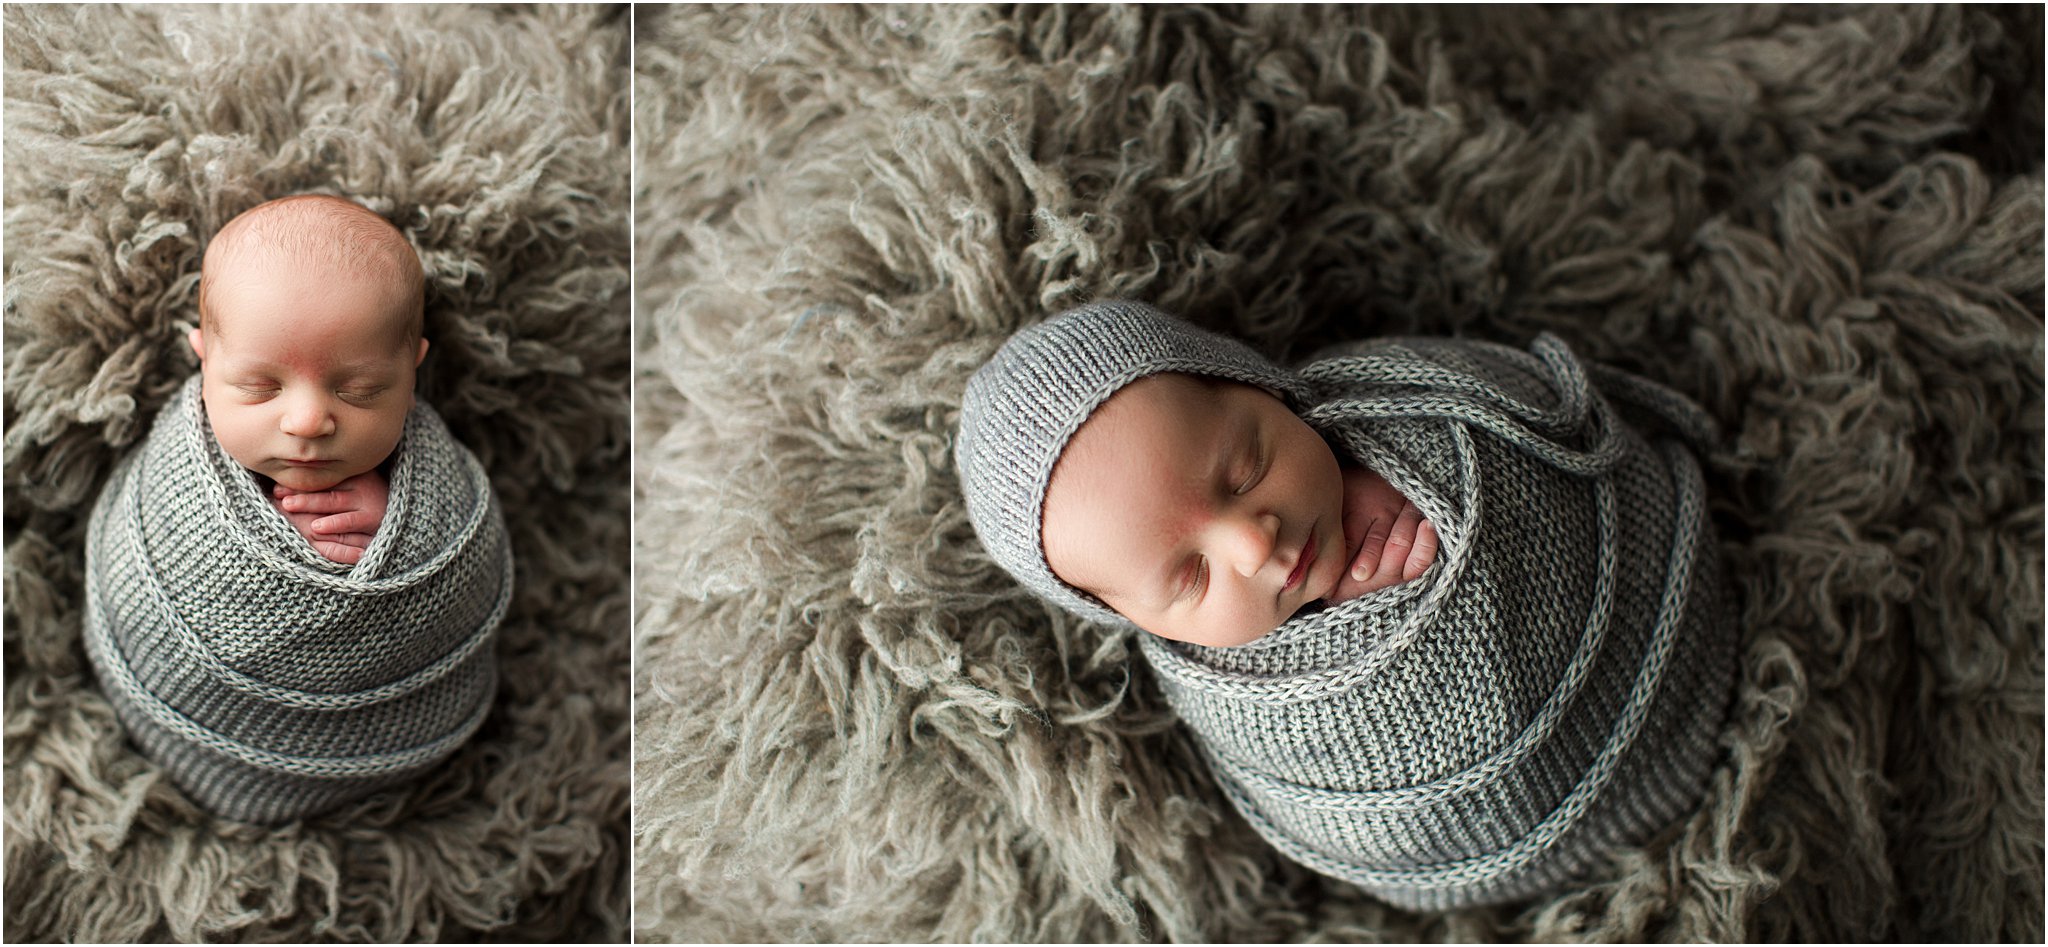 baby boy wrapped in gray knit wrap on flokati rug